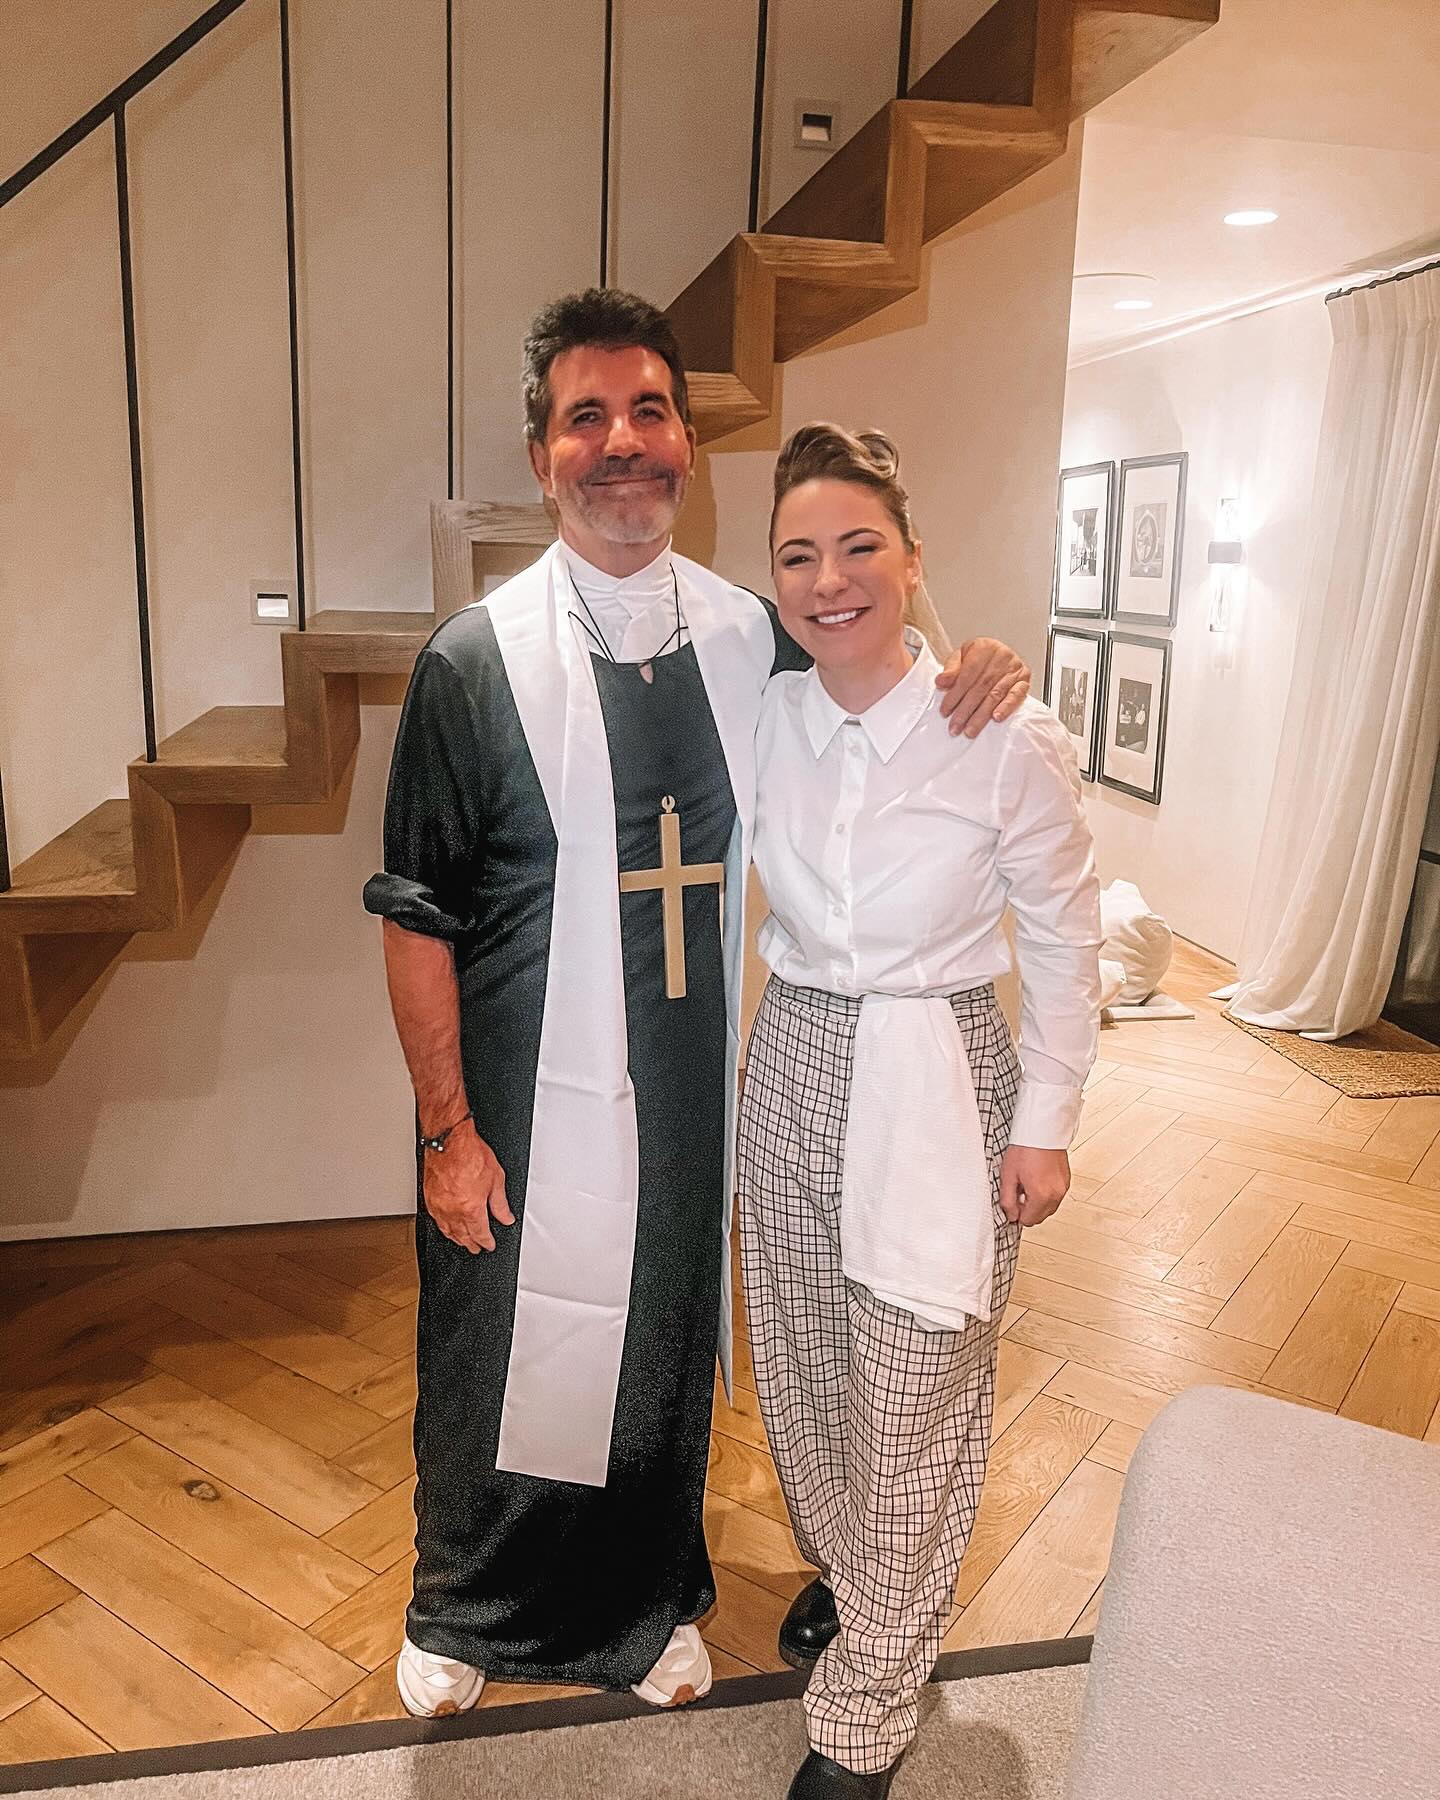 Simon Cowell invited Lucy Spraggan over to his house for a Murder Mystery evening